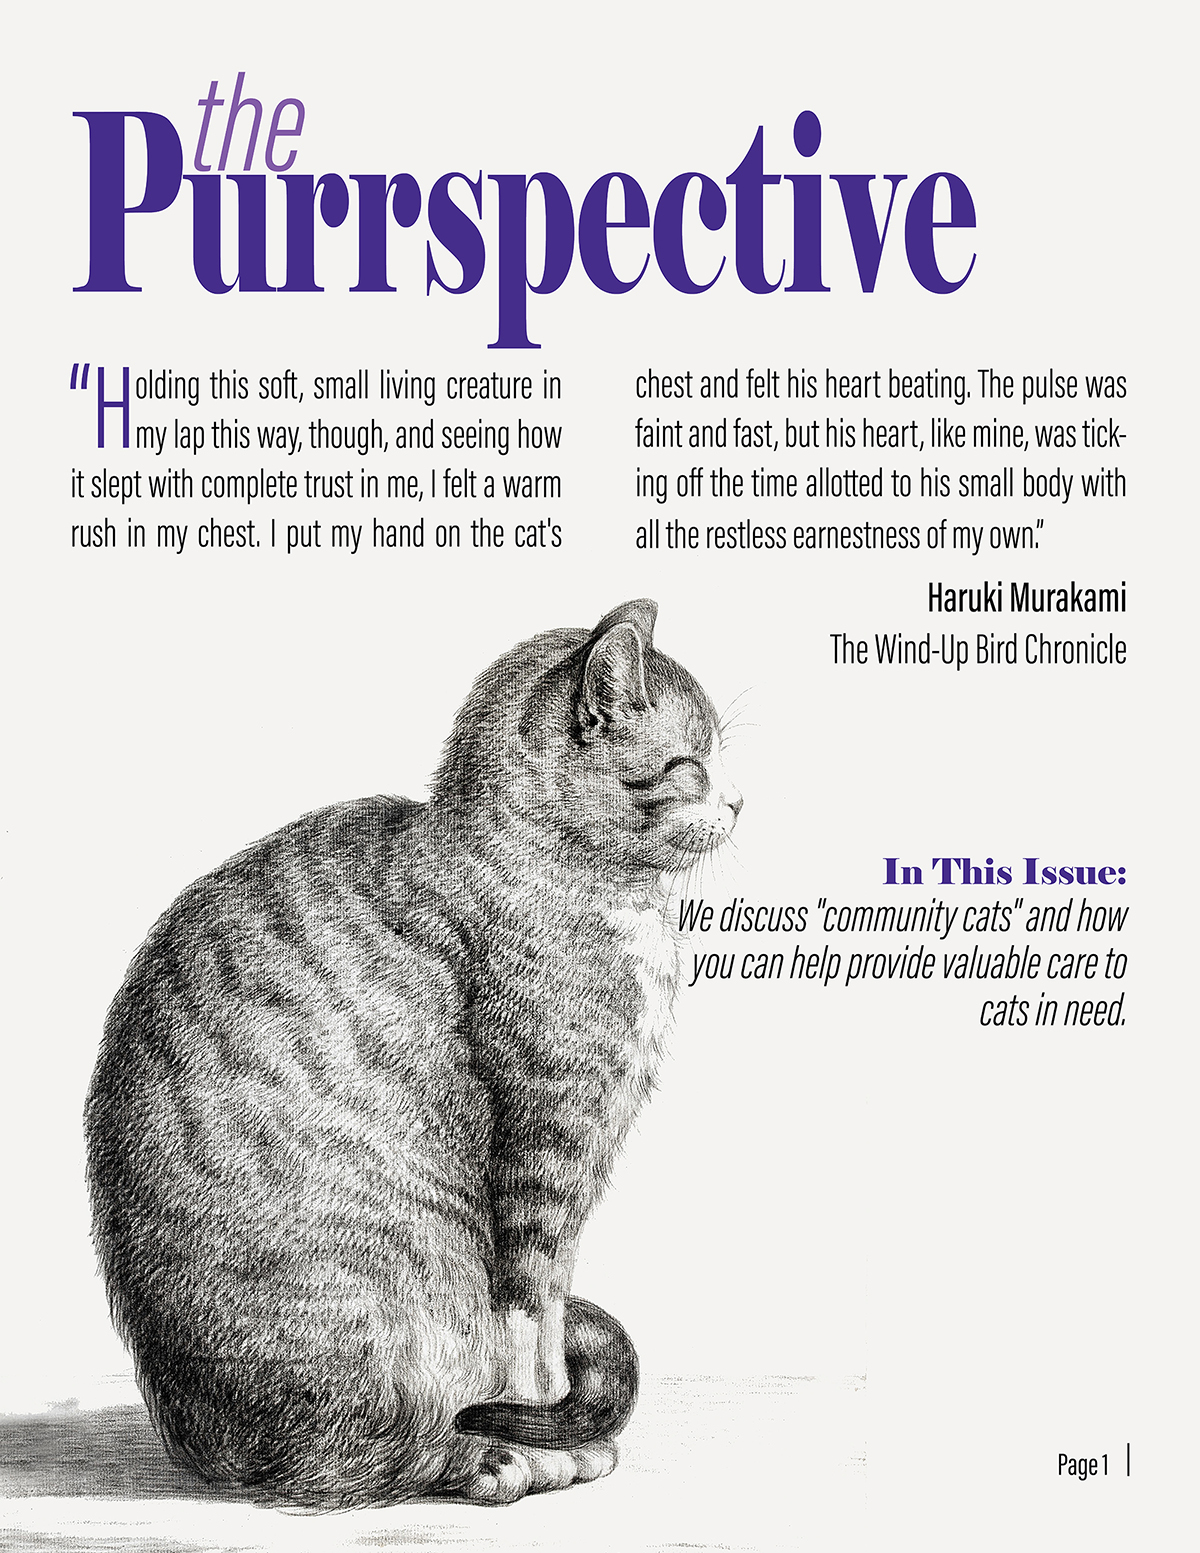 <b>The Purrspective</b><br>
      <i>Created using InDesign.</i><br> 
      This newsletter discusses the age-old needs of and problems within cat rescue communities. Designed to combine sleek, modern design with traditional imagery as a commentary on the currency of these problems.